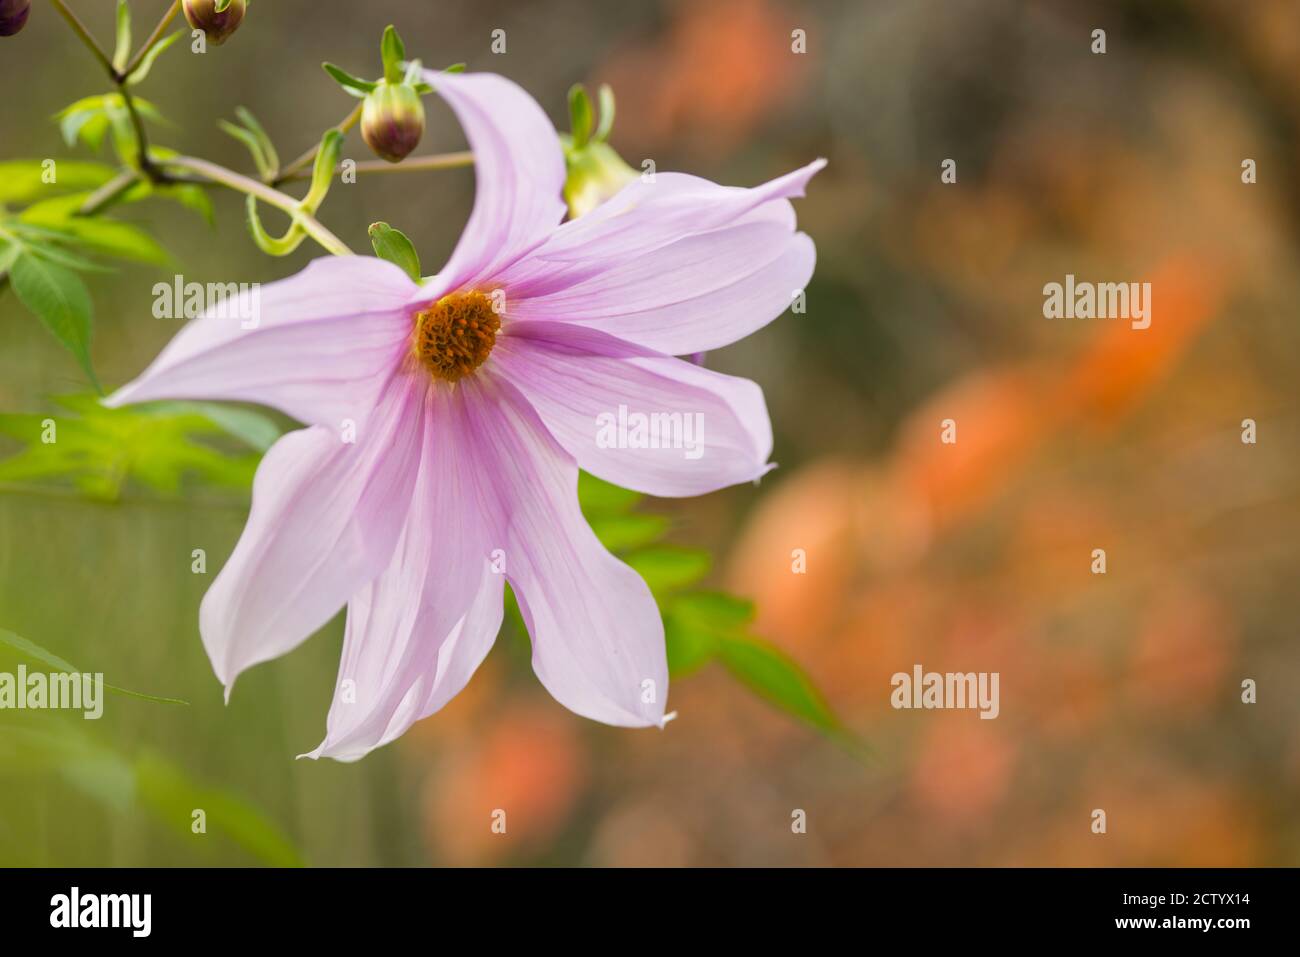 Winter flowers of Dahlia imperialis, bell tree dahlia, 8-10 metre tall bush native to Mexico, Central America and Colombia. Stock Photo